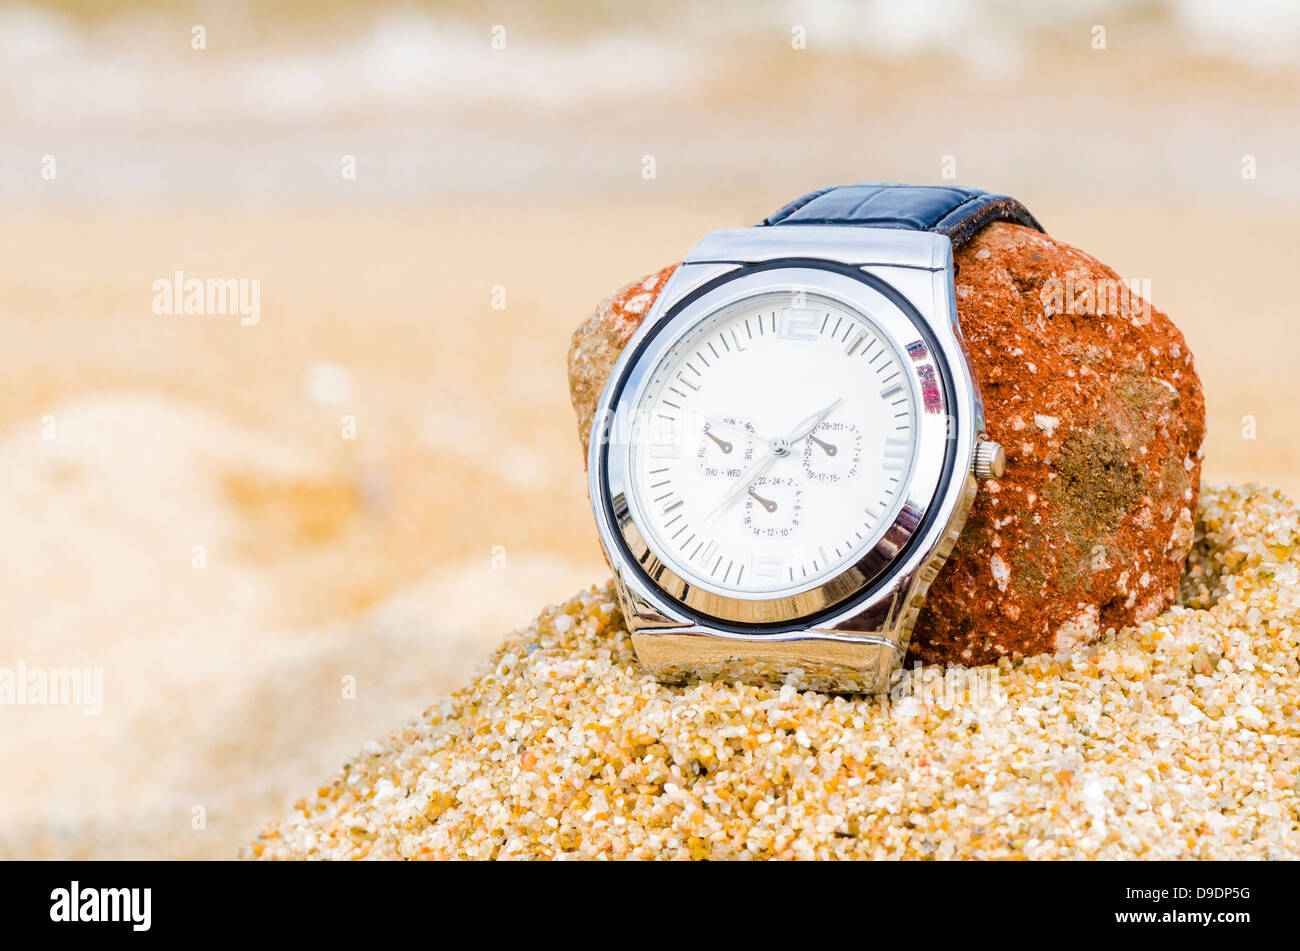 An watch in sand on a beach Stock Photo